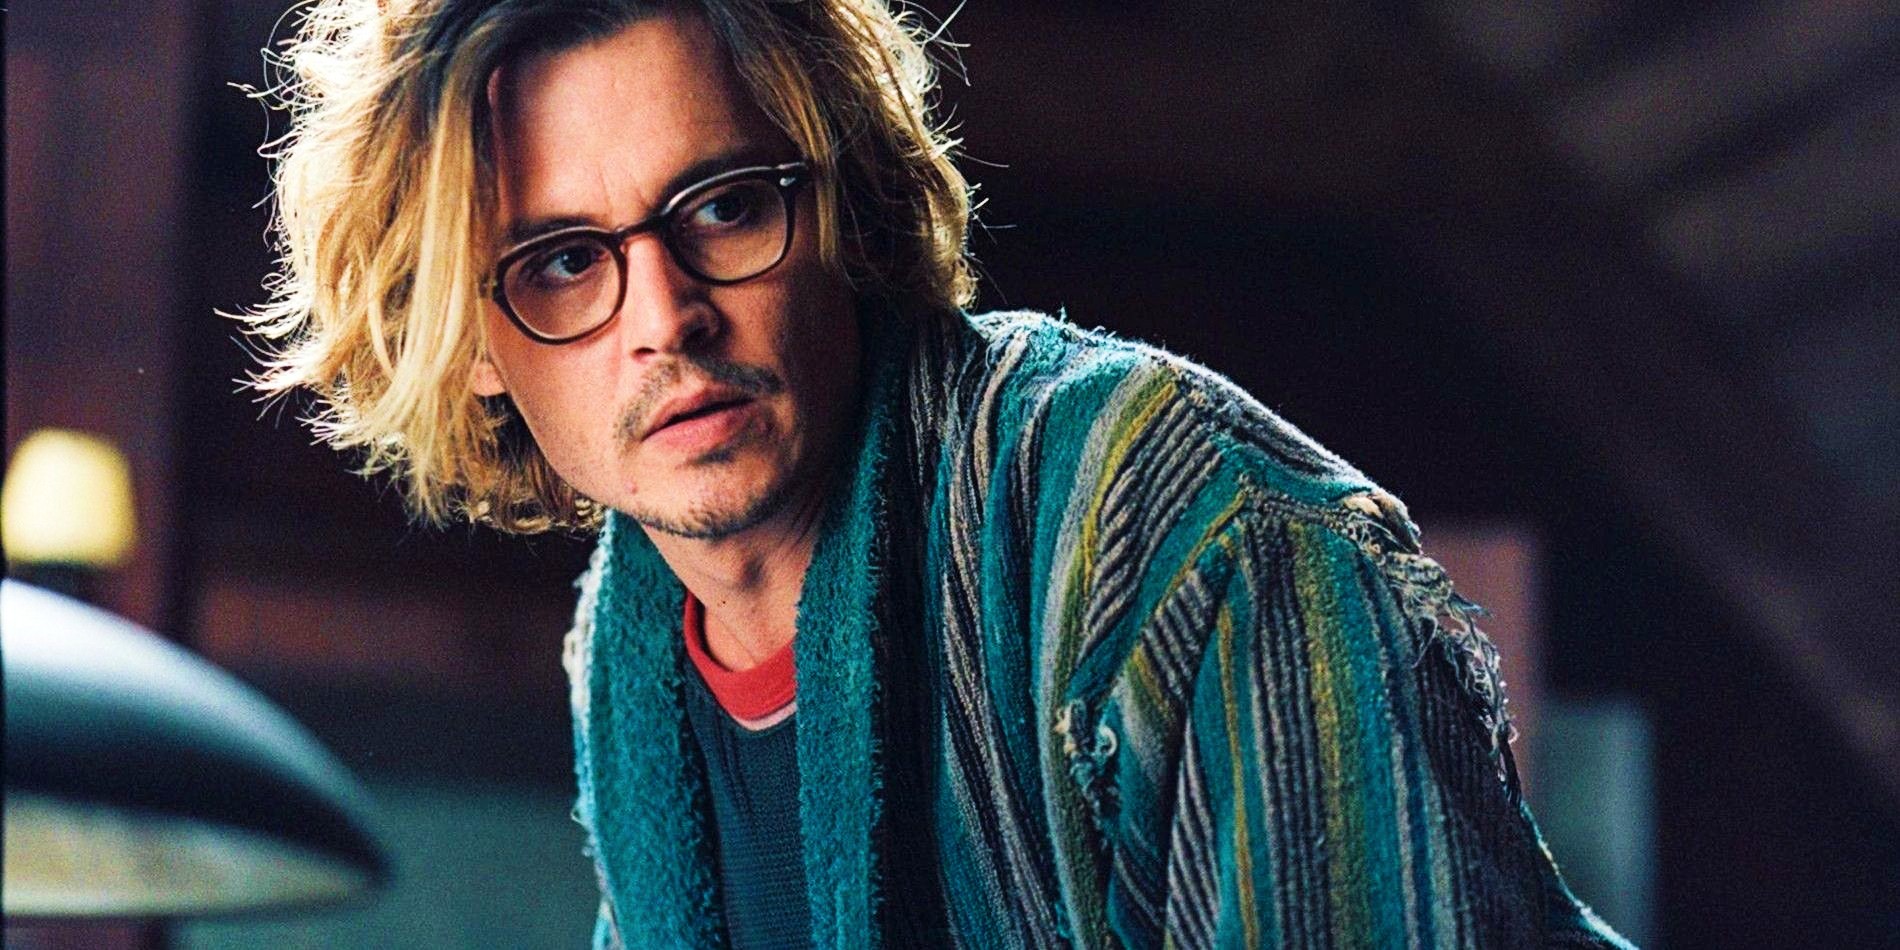 Currently on a break, Depp does not hint any wish to quit his acting career.